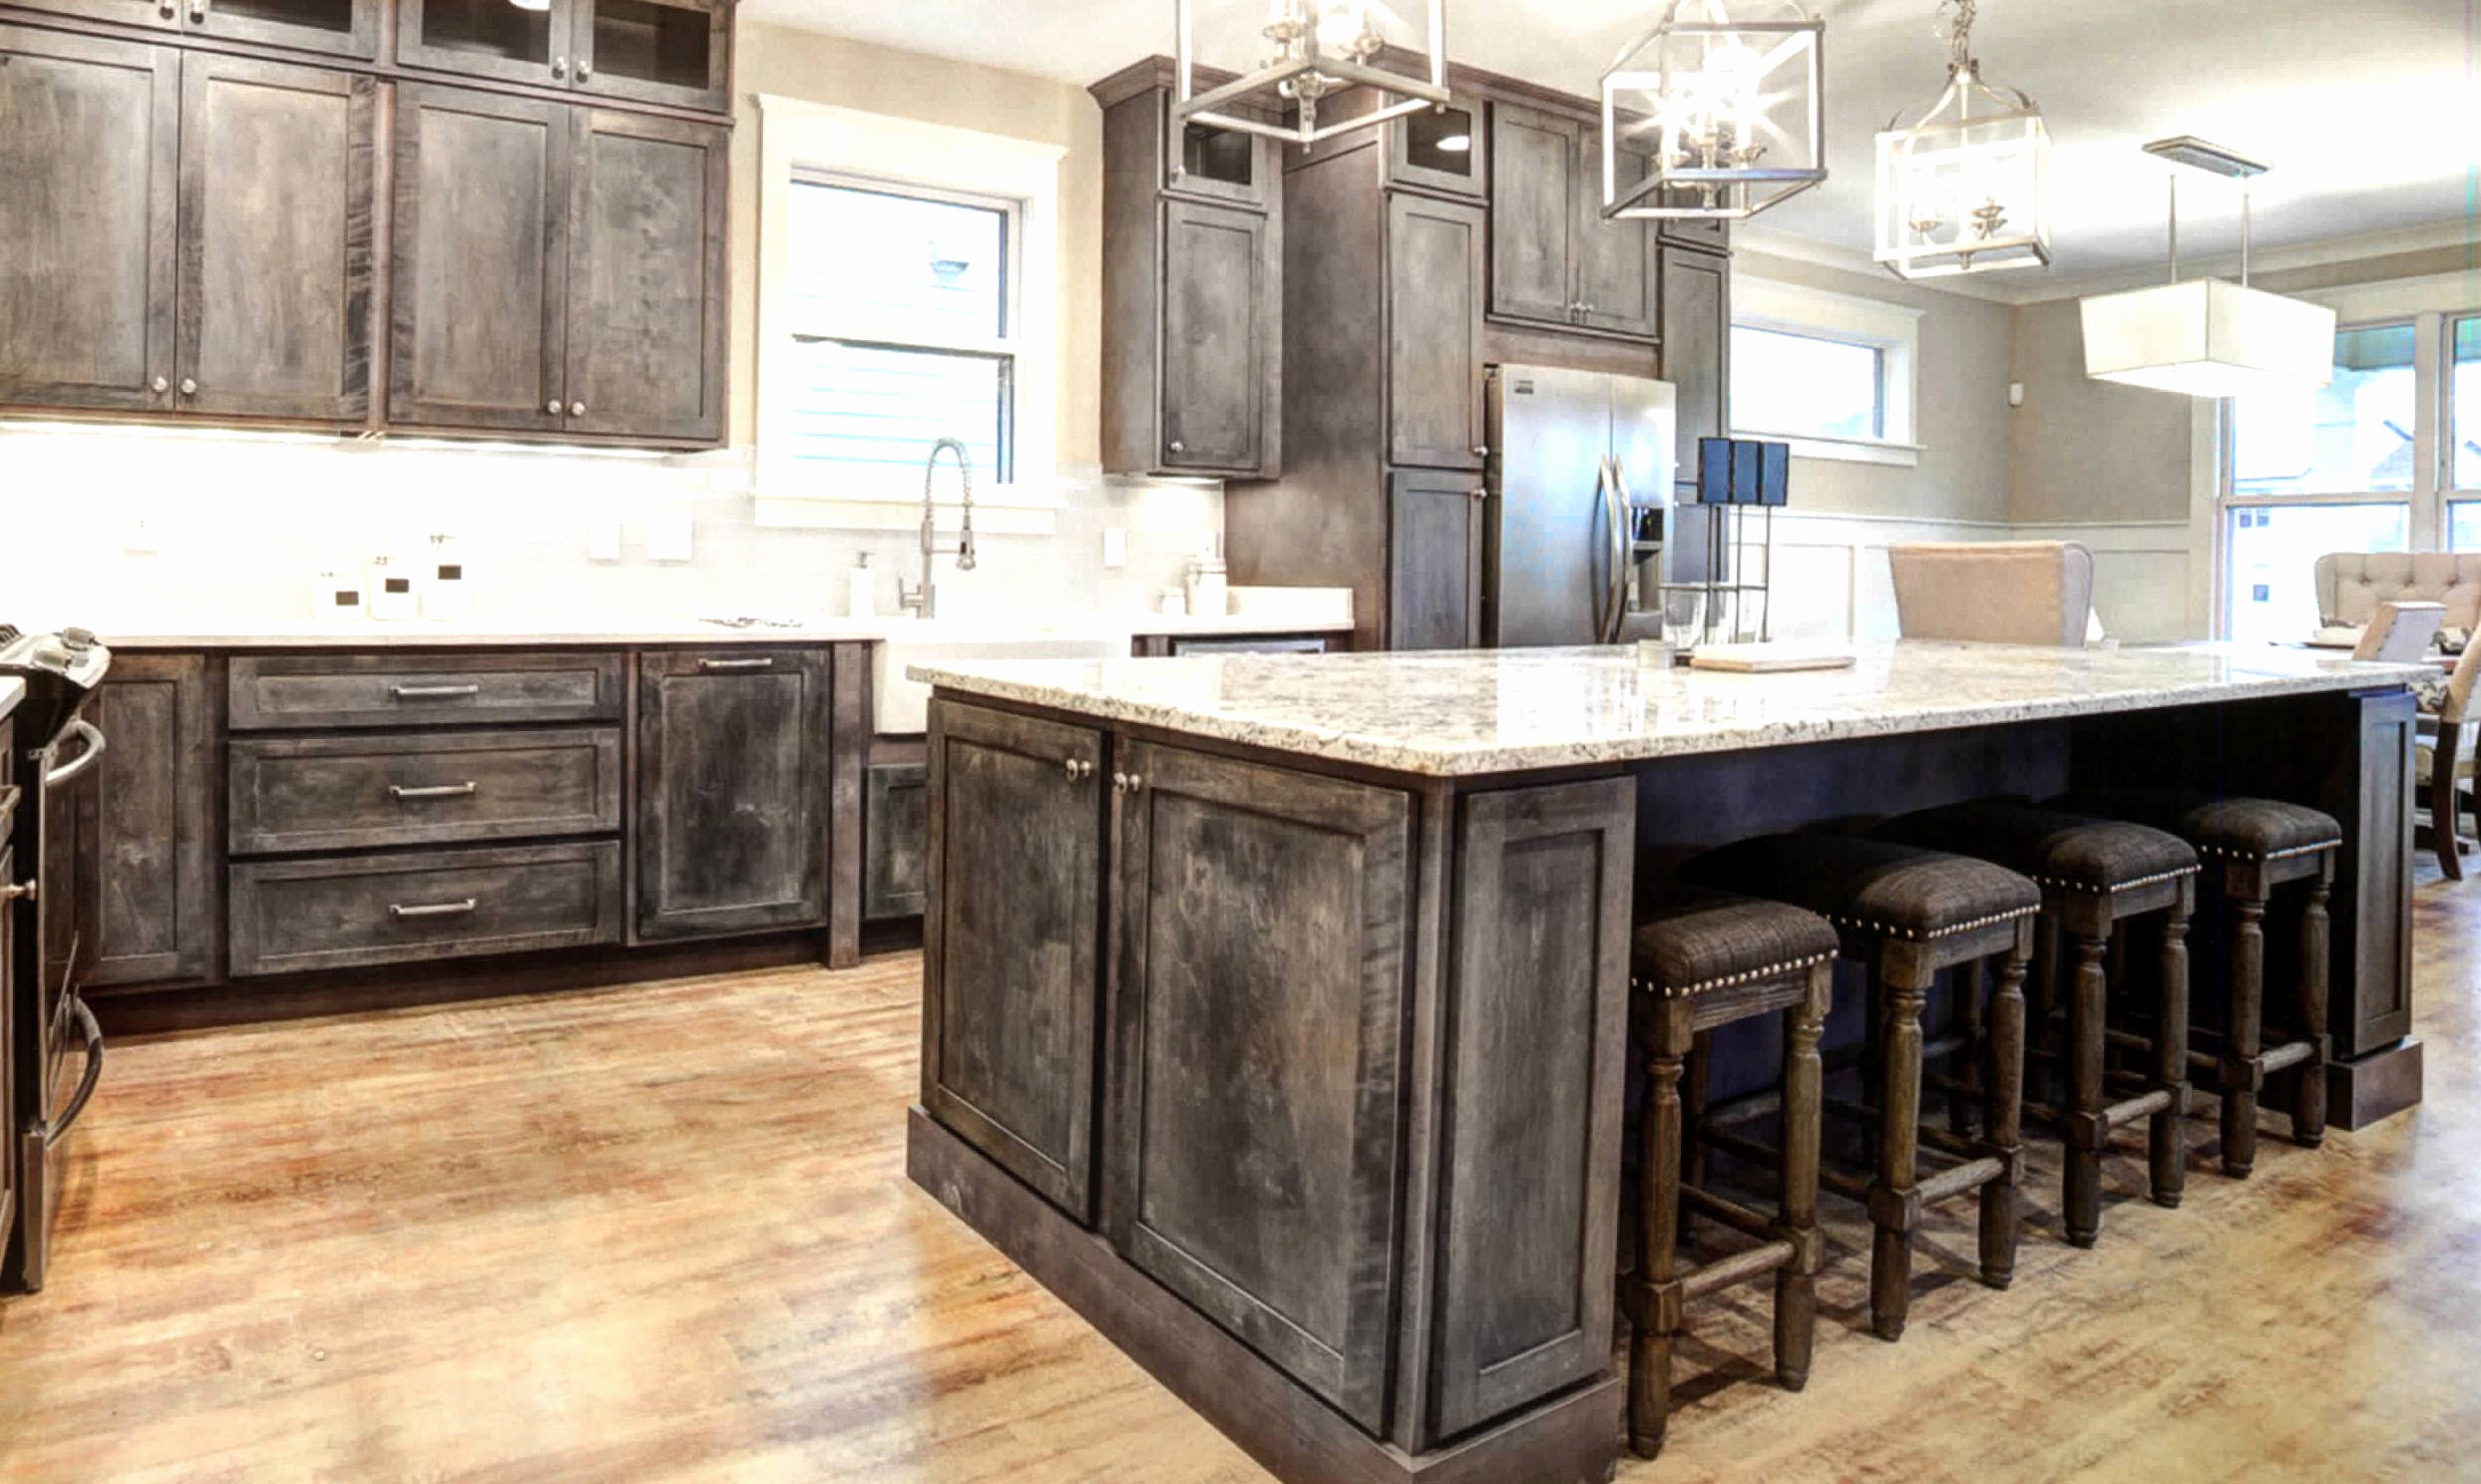 Rustic Painted Kitchen Cabinets
 10 Best Rustic Painted Hardwood Floors